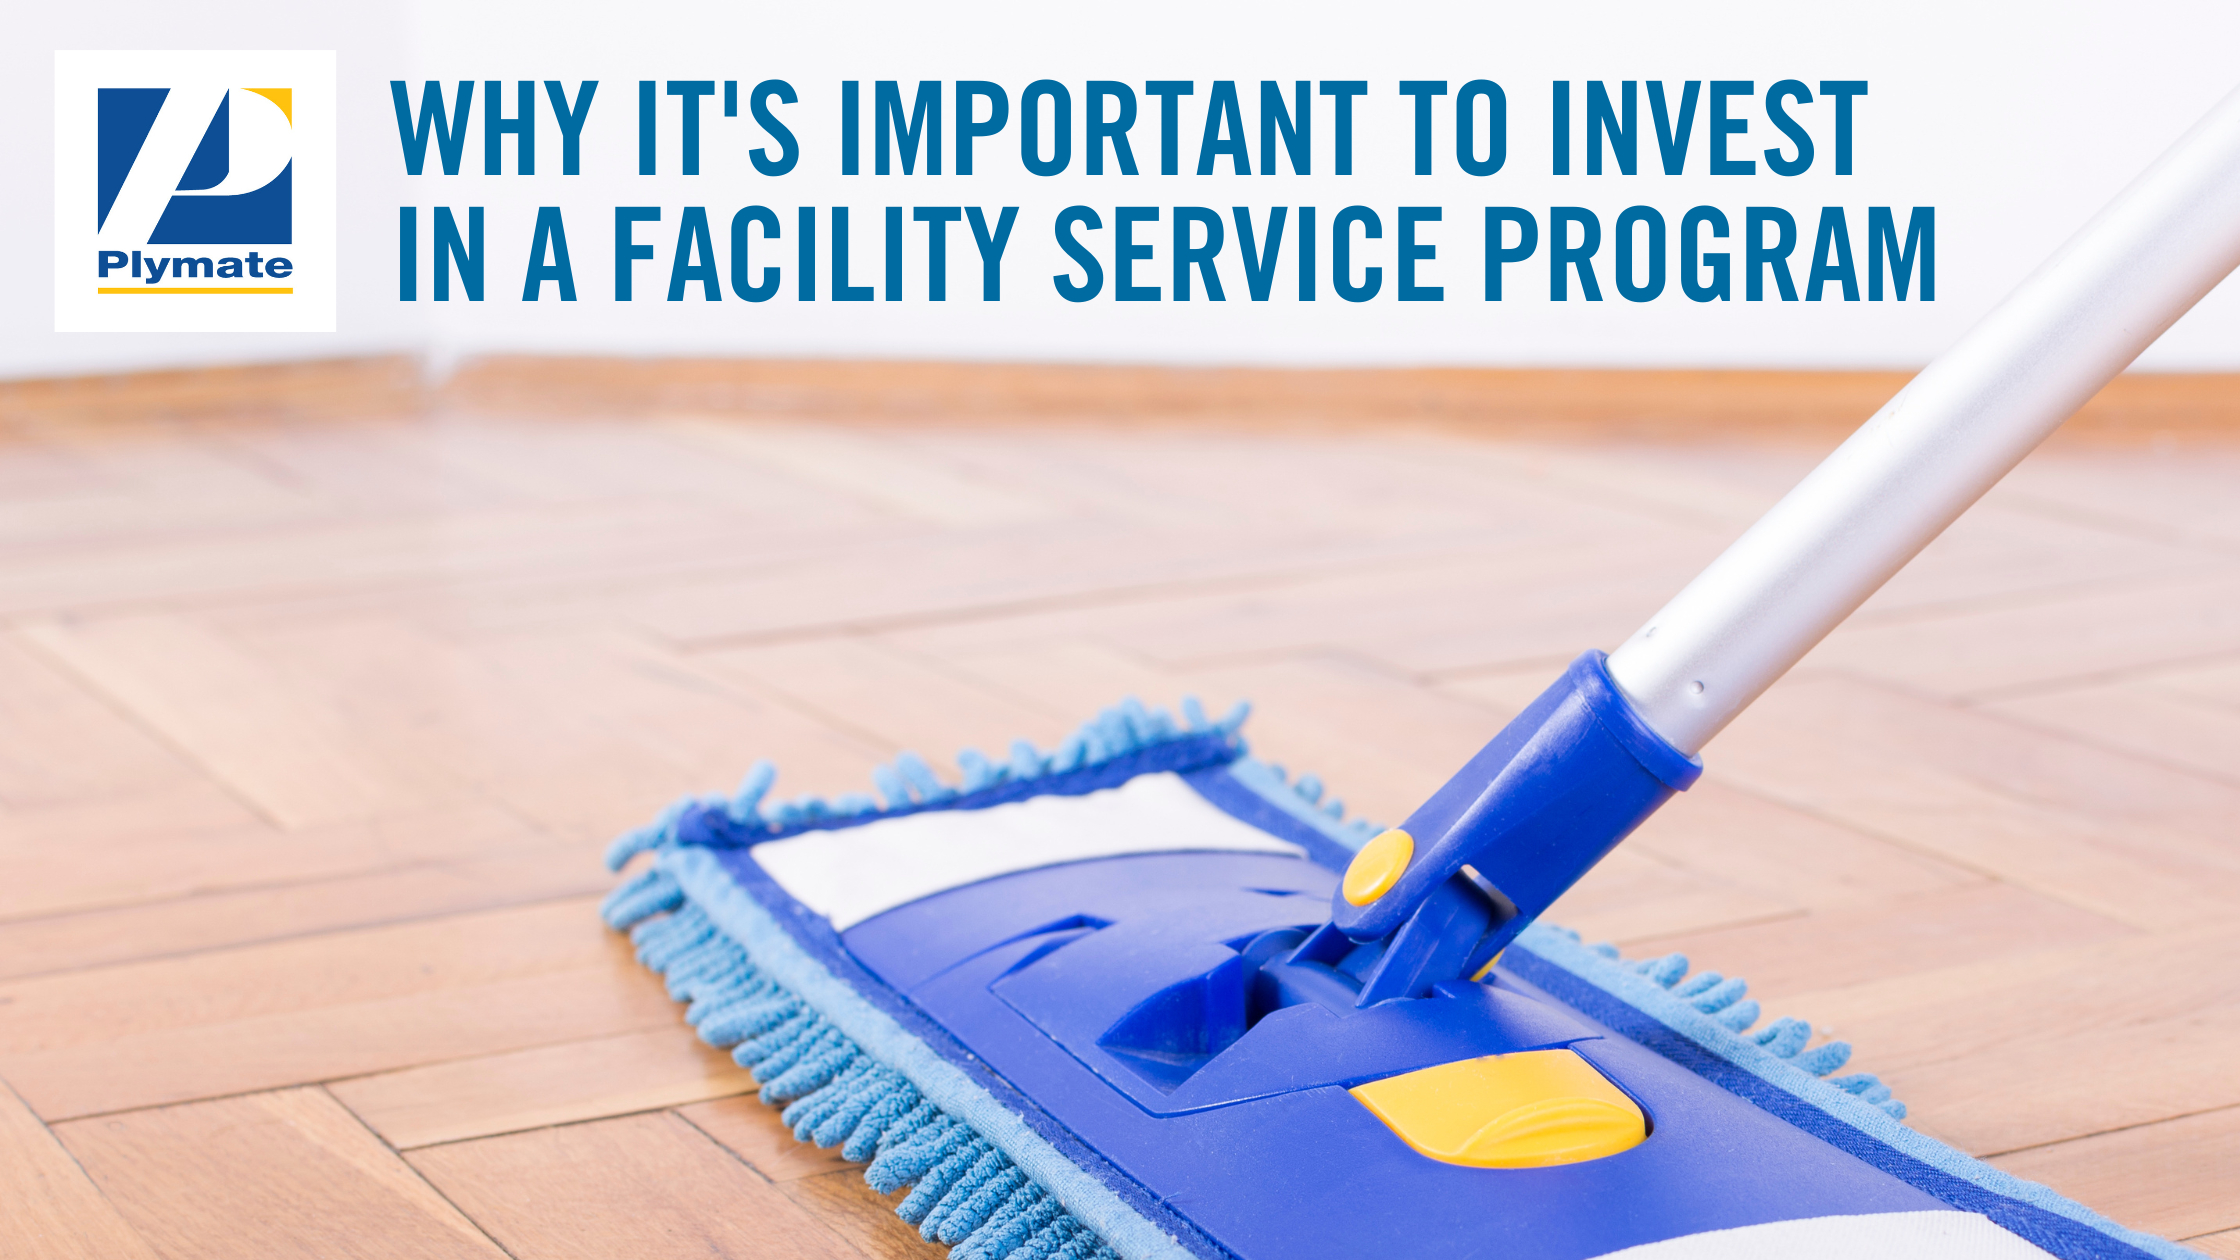 Why Investing in Facility Service Programs is Important